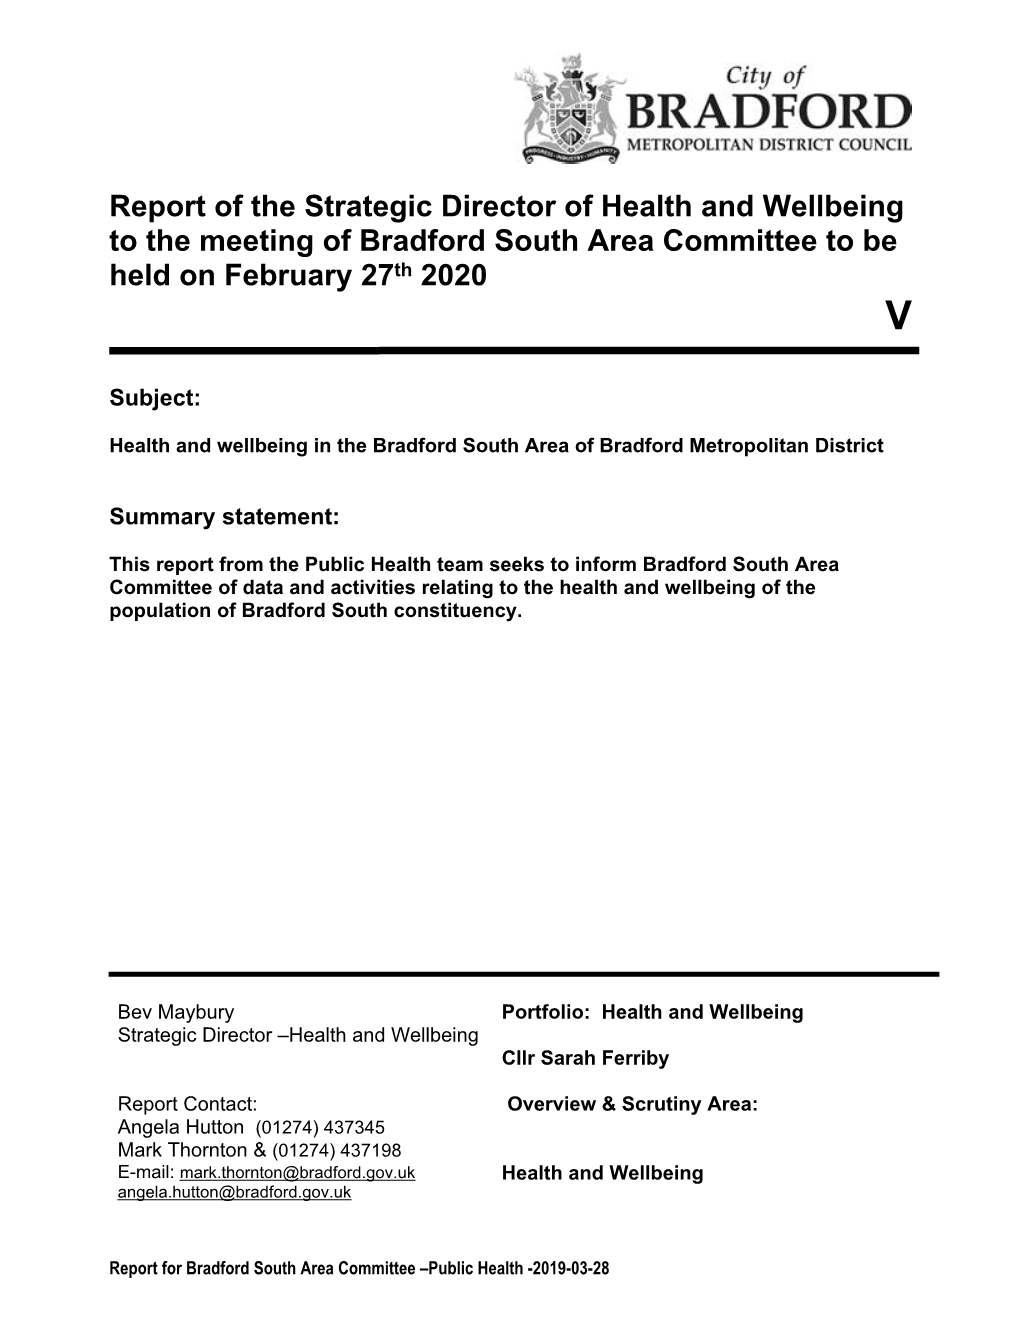 Health and Wellbeing in the Bradford South Area of Bradford Metropolitan District